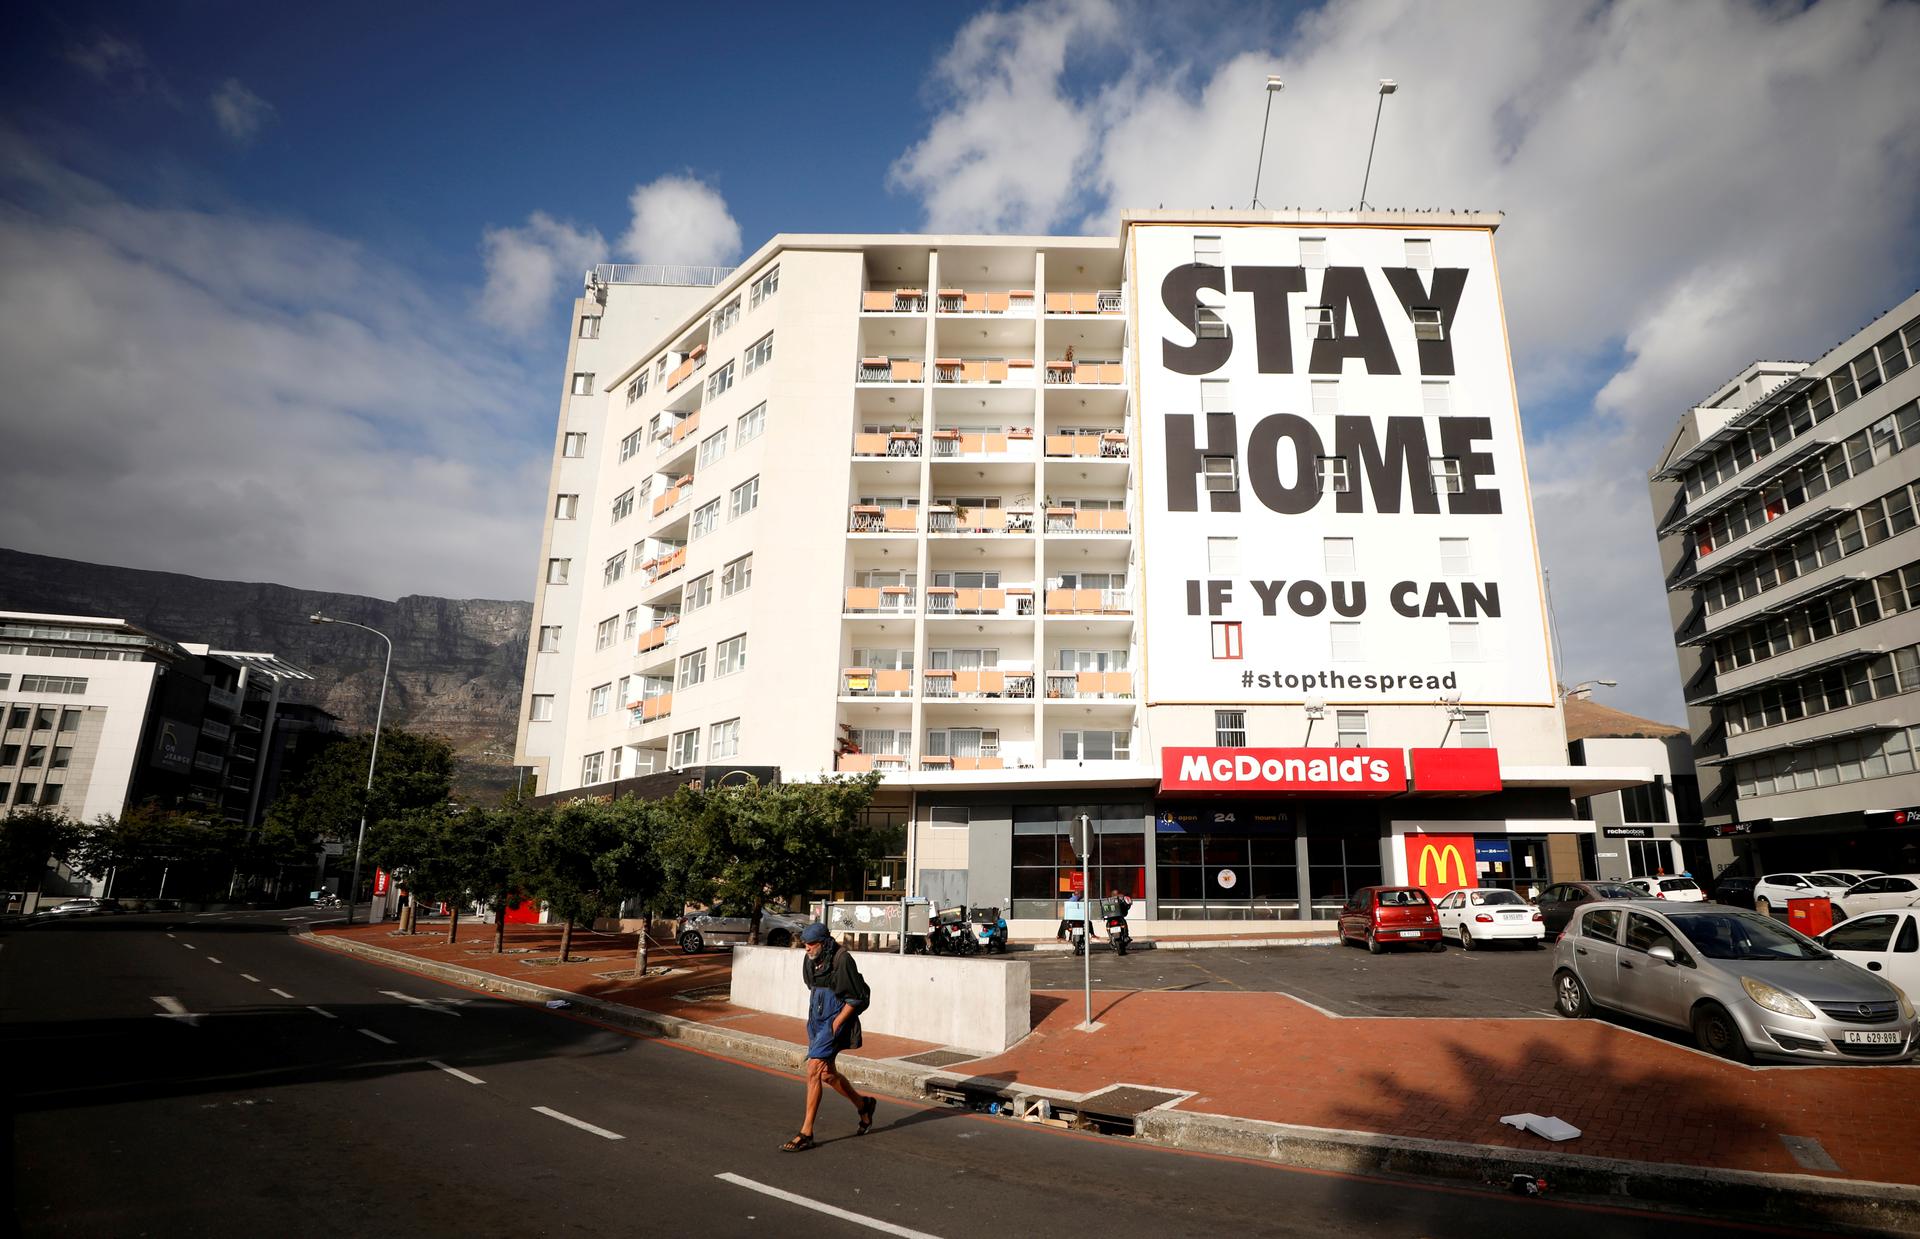 Stay at home sign in South Africa